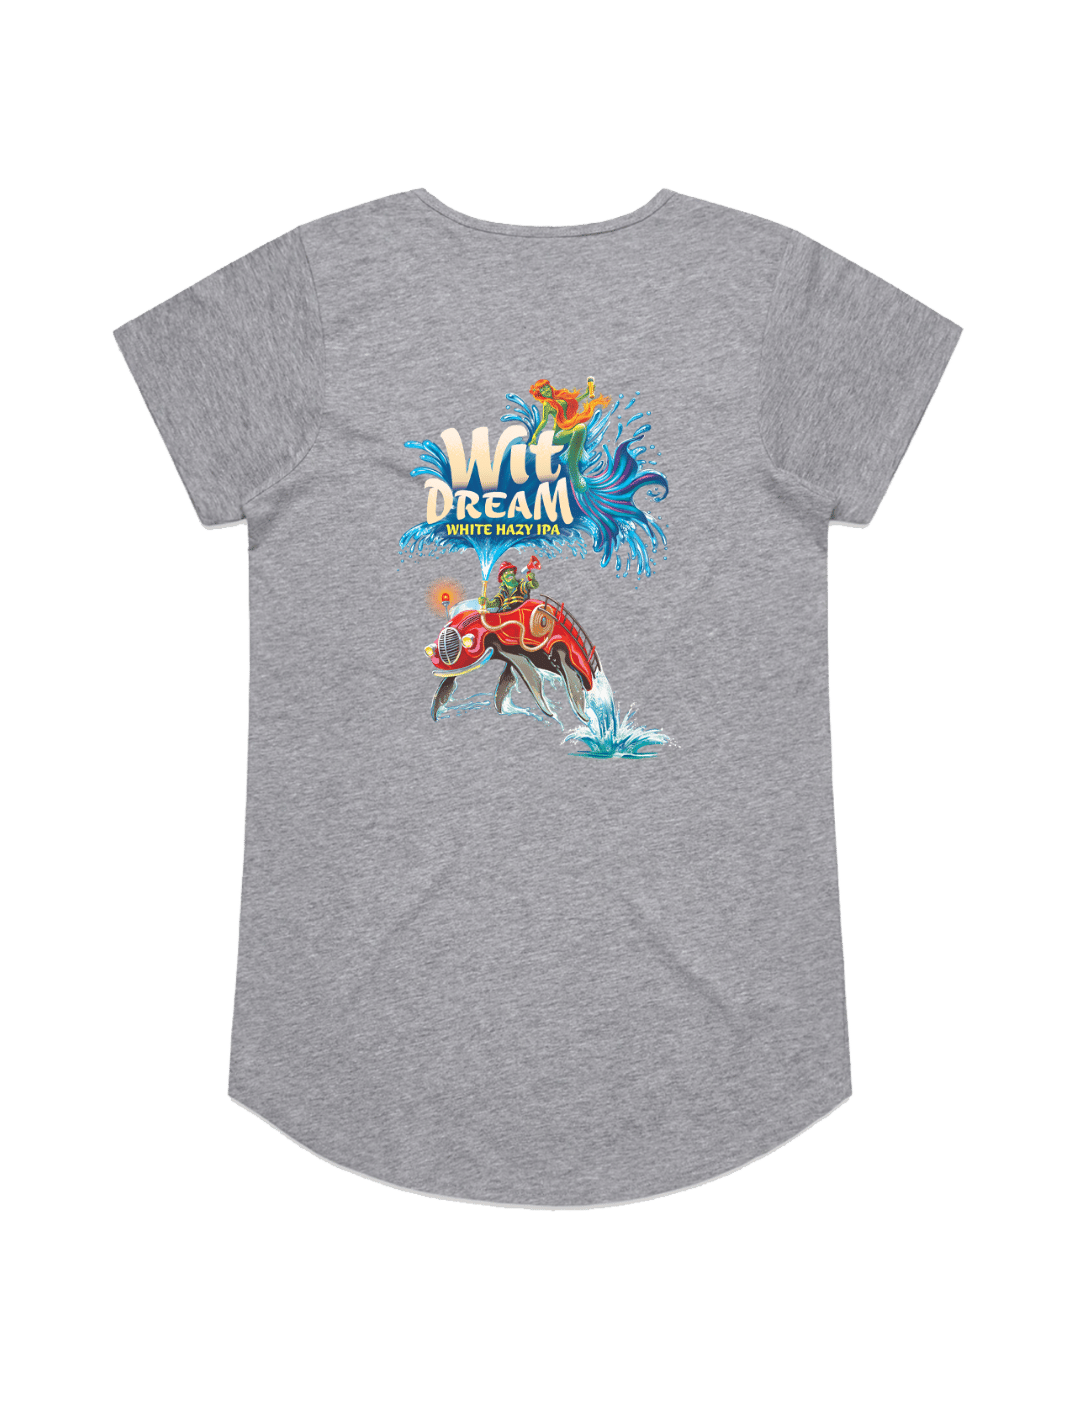 Bach Brewing Womens Short Sleeve T-shirt - Wit Dream (back graphic)